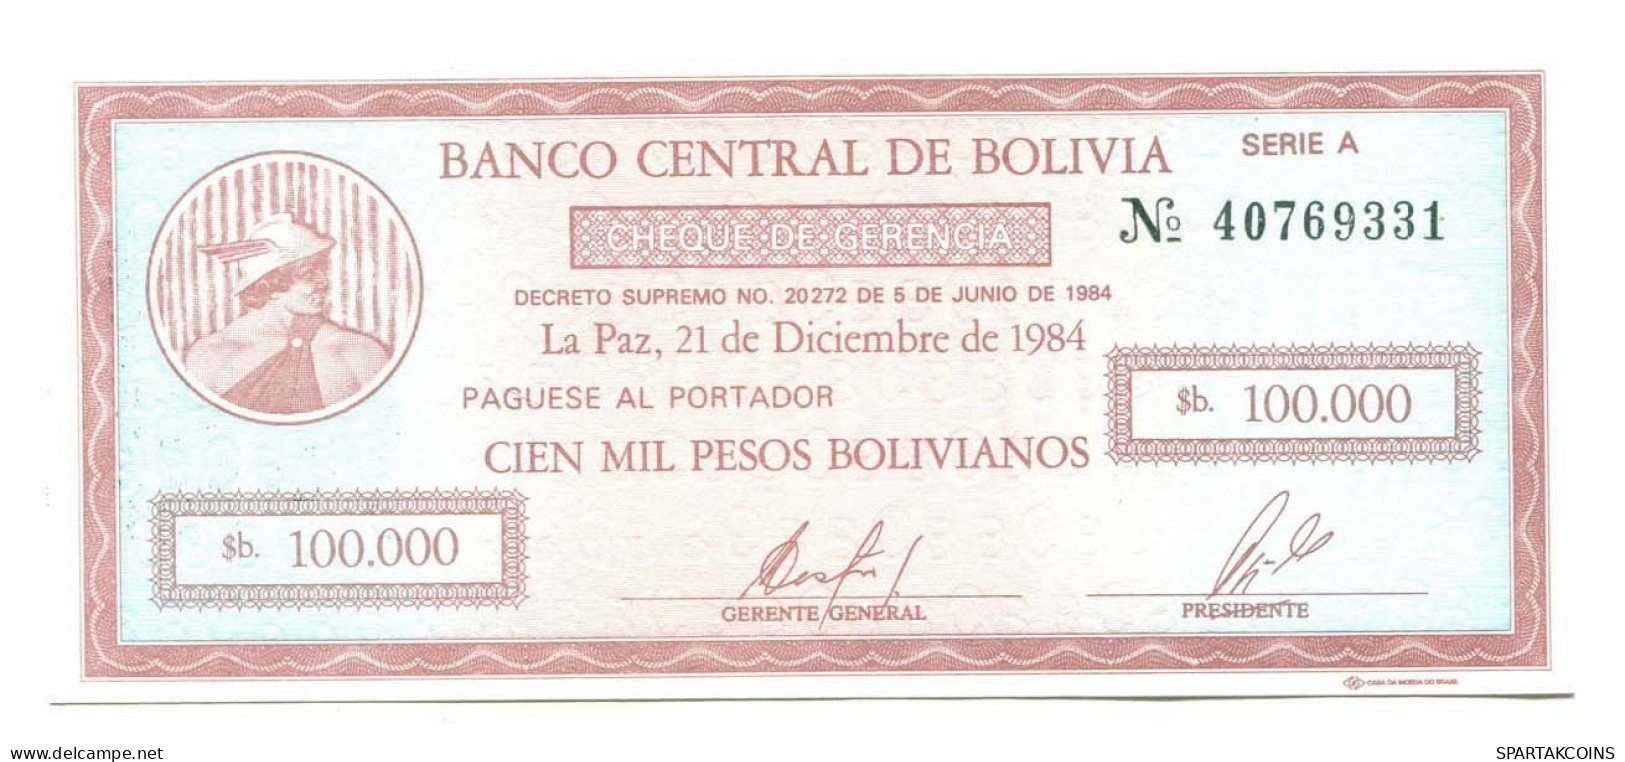 BOLIVIA 10 CENTAVOS ON 100 000 PESOS BOLIVIANOS 1984 SERIE A AUNC #P10818.4 - [11] Local Banknote Issues